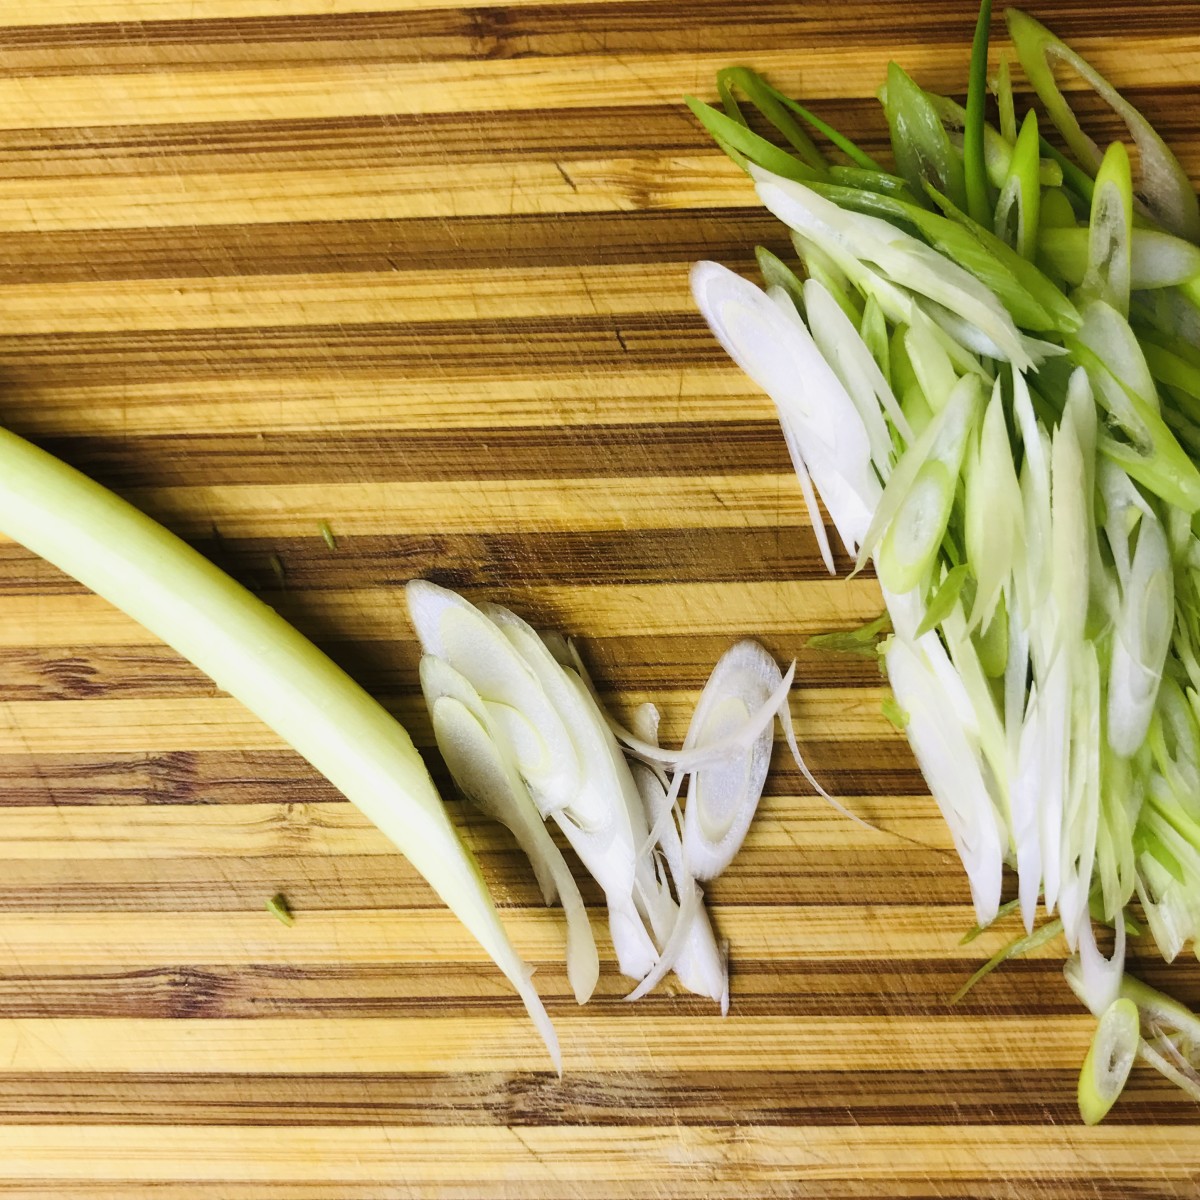 Thinly slice the scallions on the bias. To do this, slice at about a 45 degree angle. For this recipe you will use the entire scallion, both green and white.